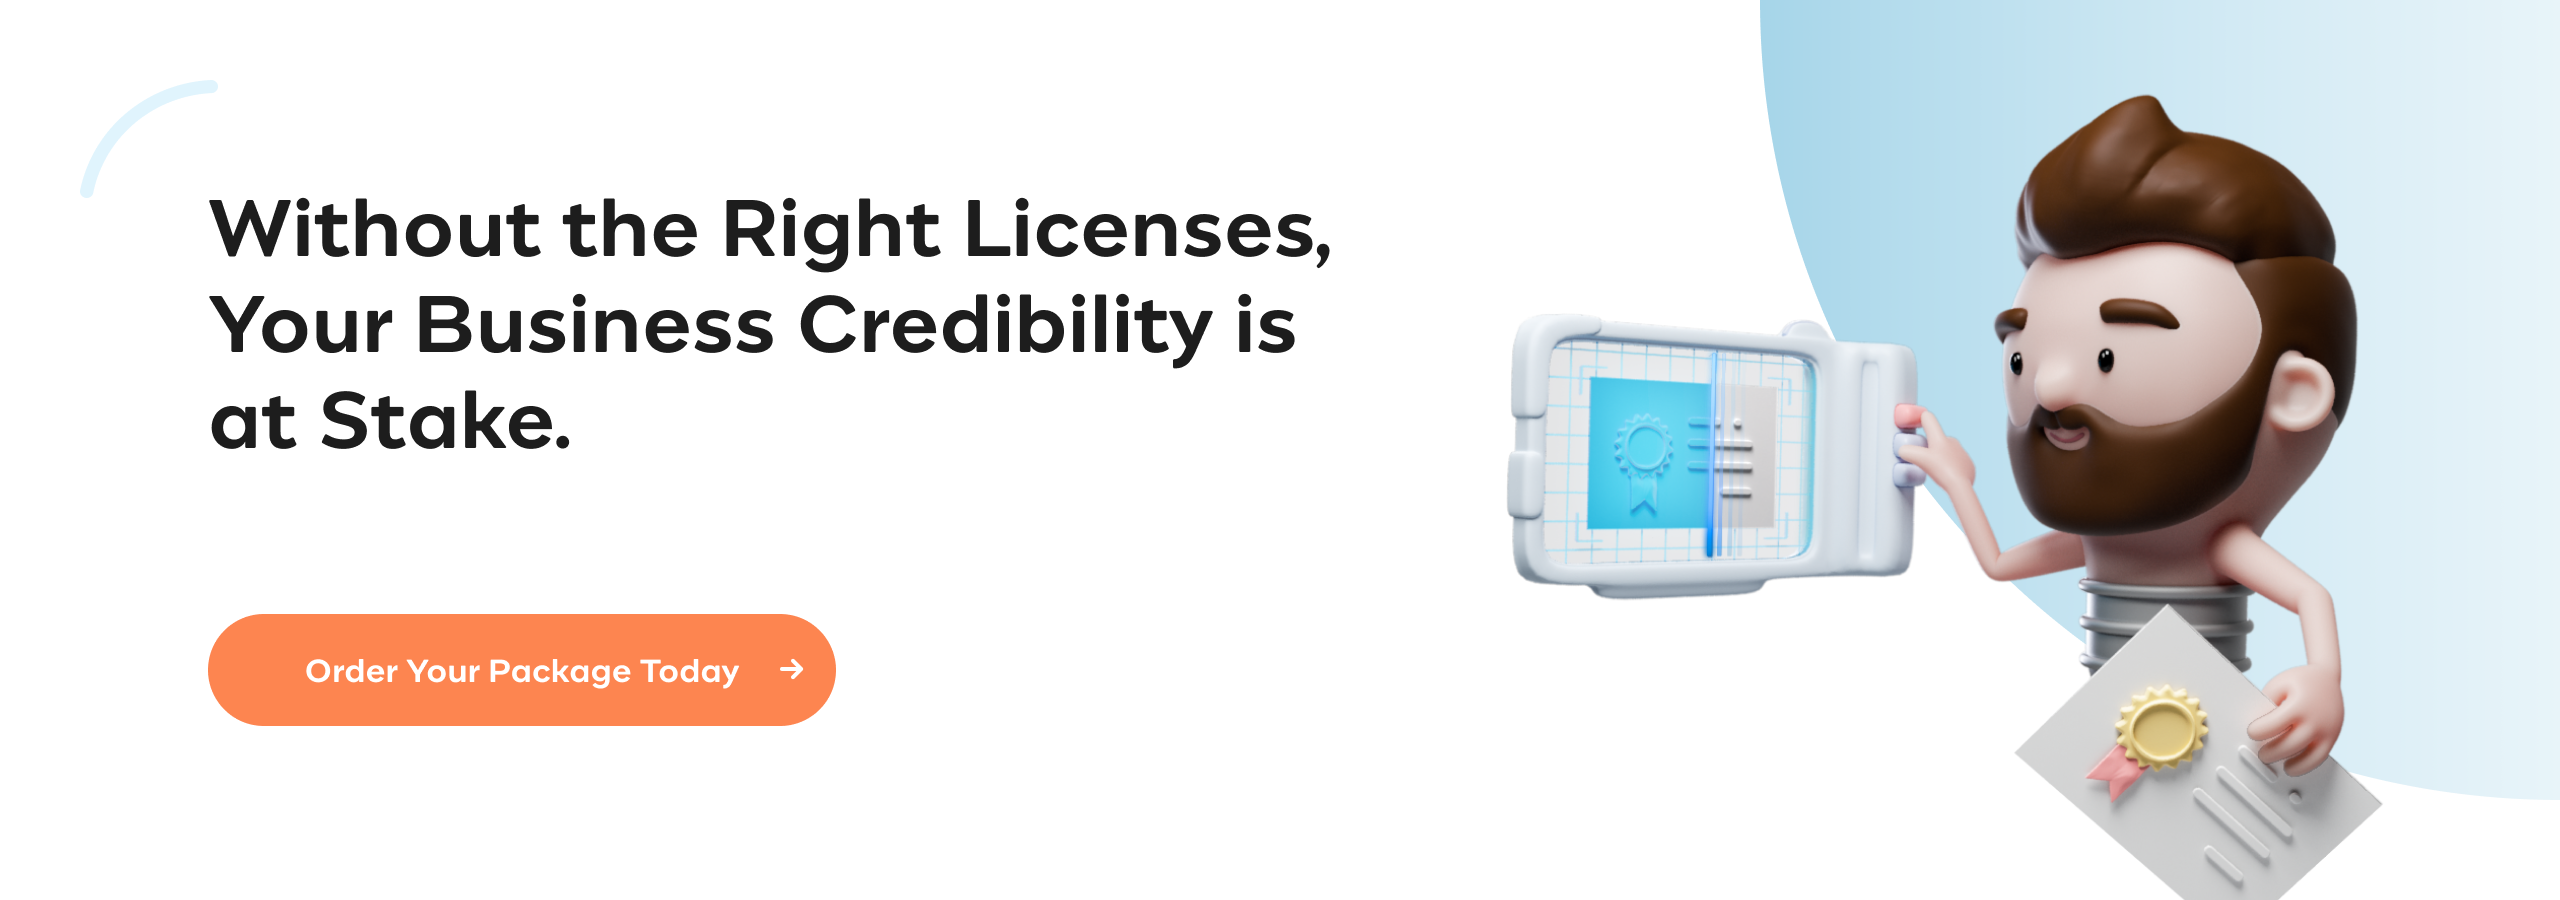 Without the Right Licenses, Your Business Credibility is at Stake. Order Your Package Today.